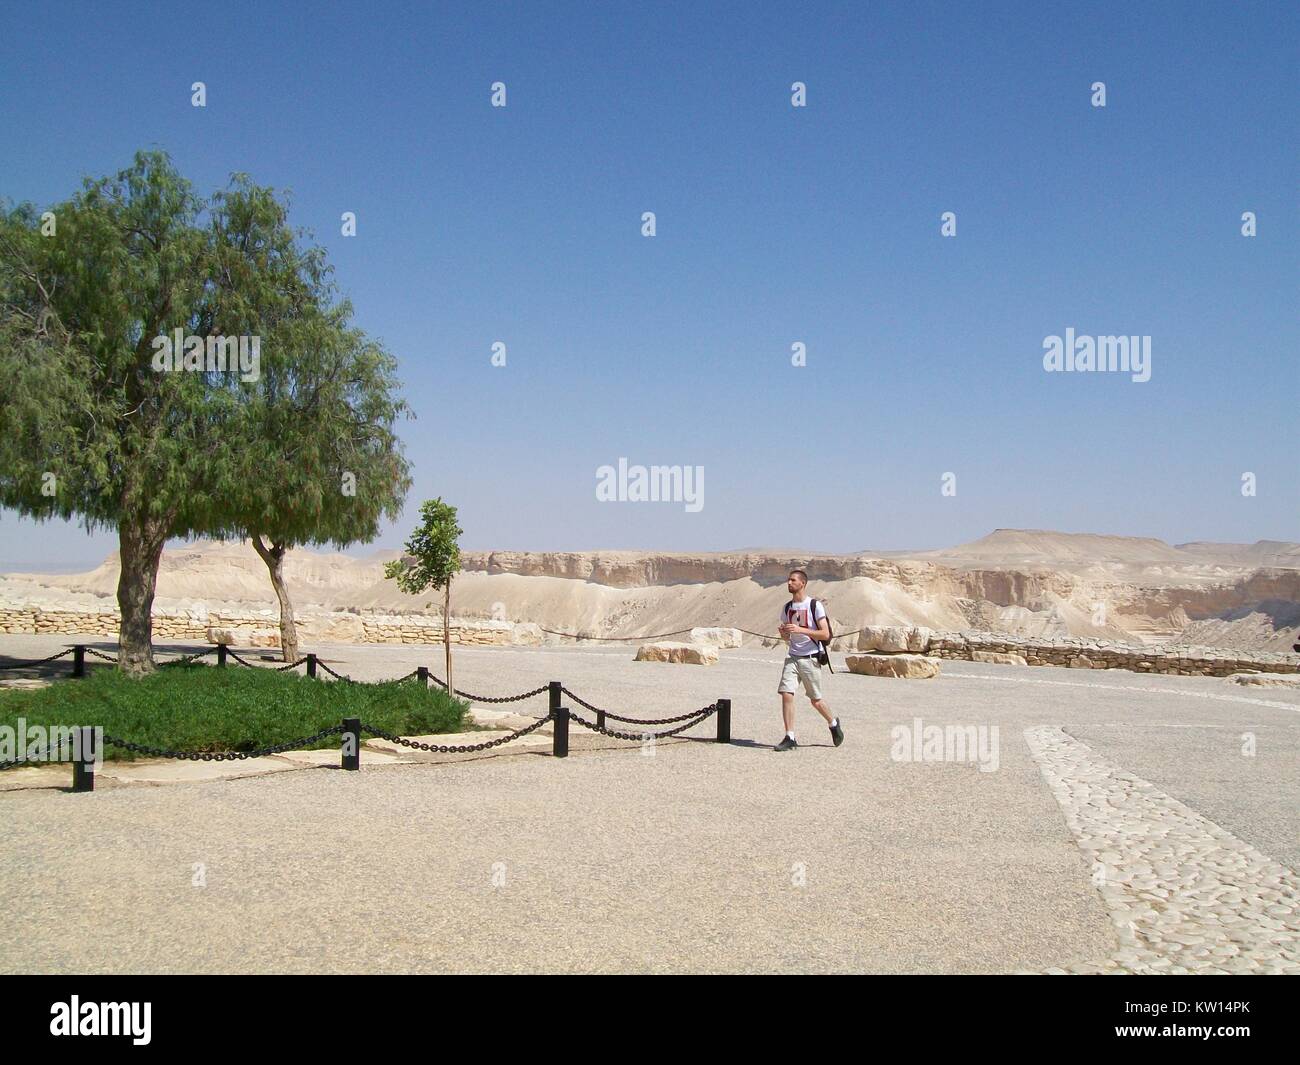 At the gravesite of David Ben-Gurion, founder of the country of Israel, and his wife Paula Ben-Gurion, an off-duty Israel soldier walks towards a small patch of trees, Negev Desert, Israel, 2012. Stock Photo